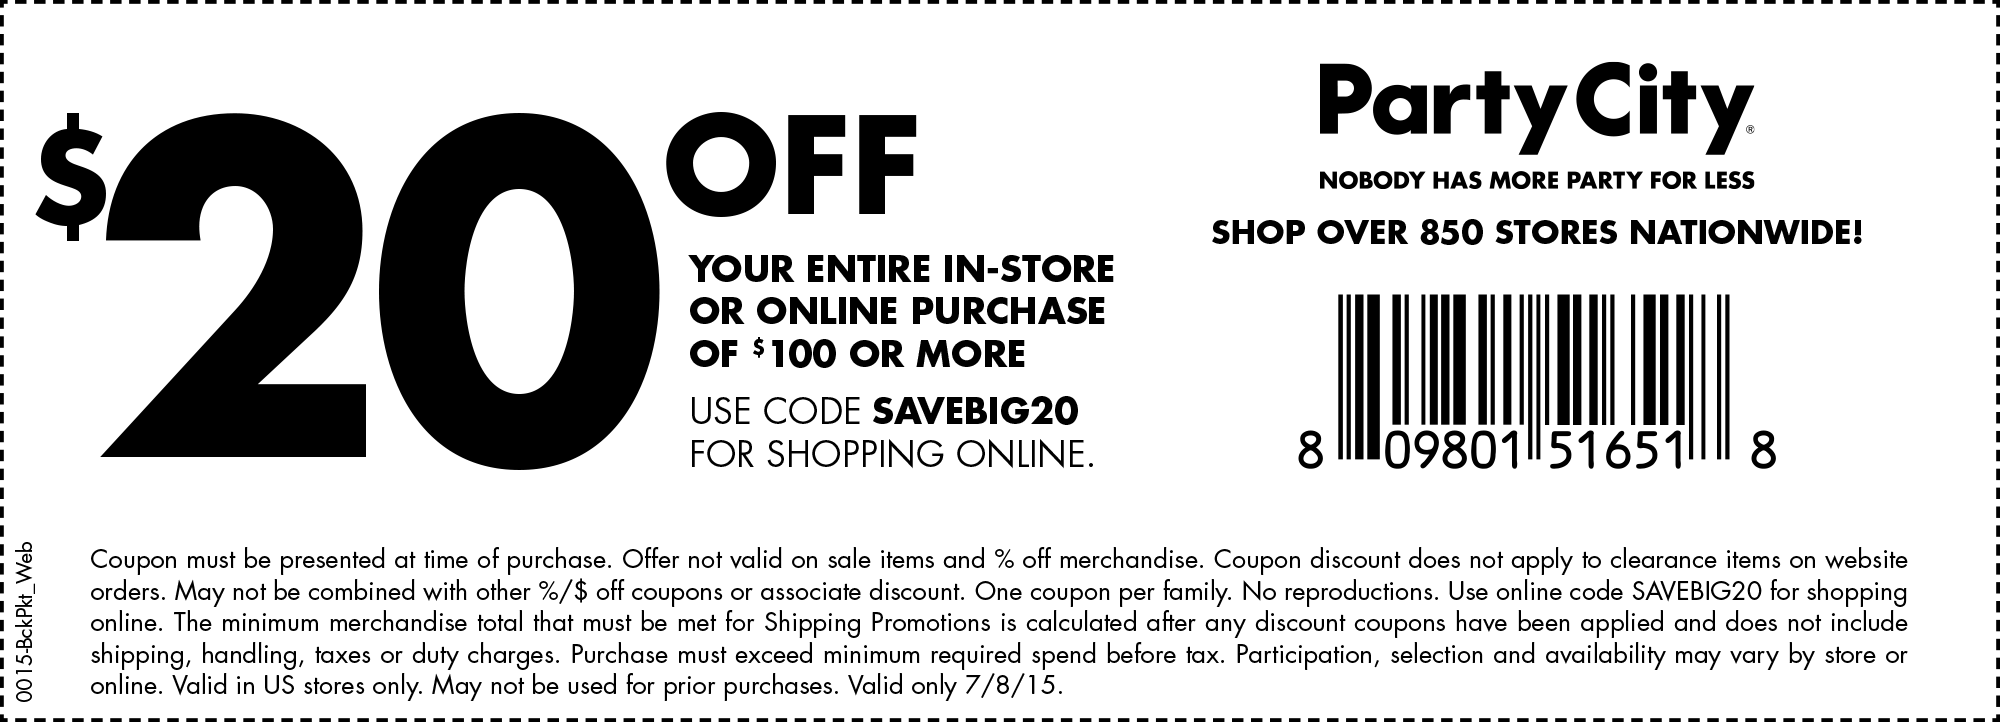 Party City November 2020 Coupons and Promo Codes 🛒